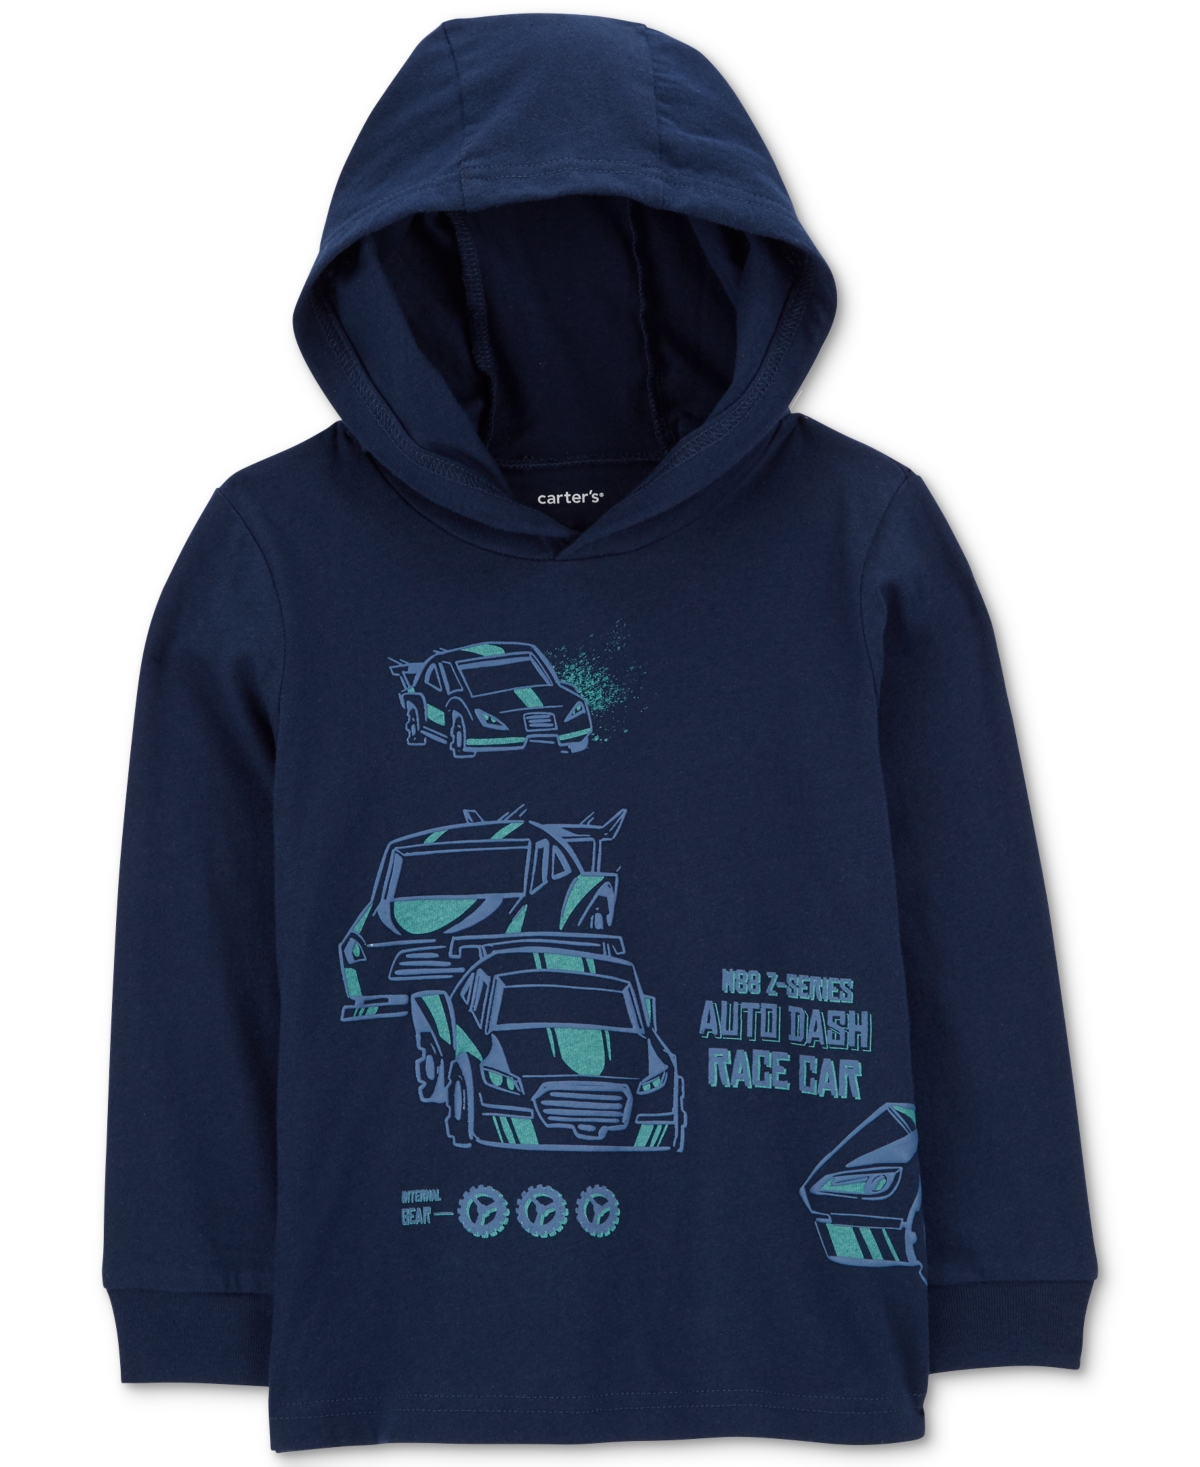 Carter's Babies' Toddler Boys Race Car Graphic Cotton Hooded T-shirt In Blue